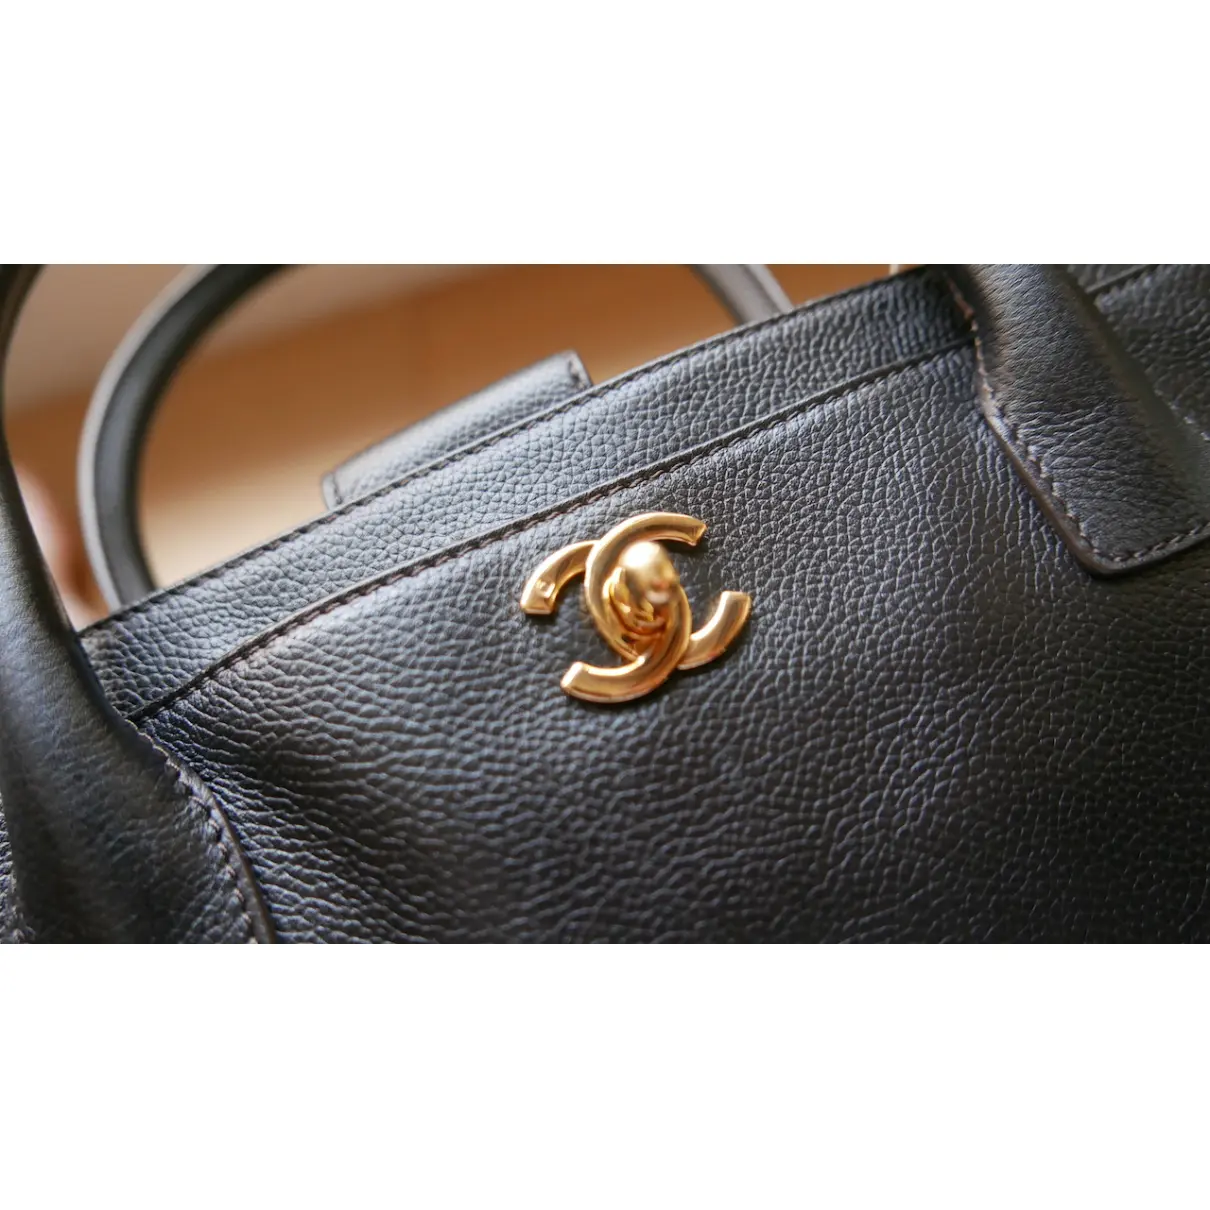 Executive leather tote Chanel - Vintage